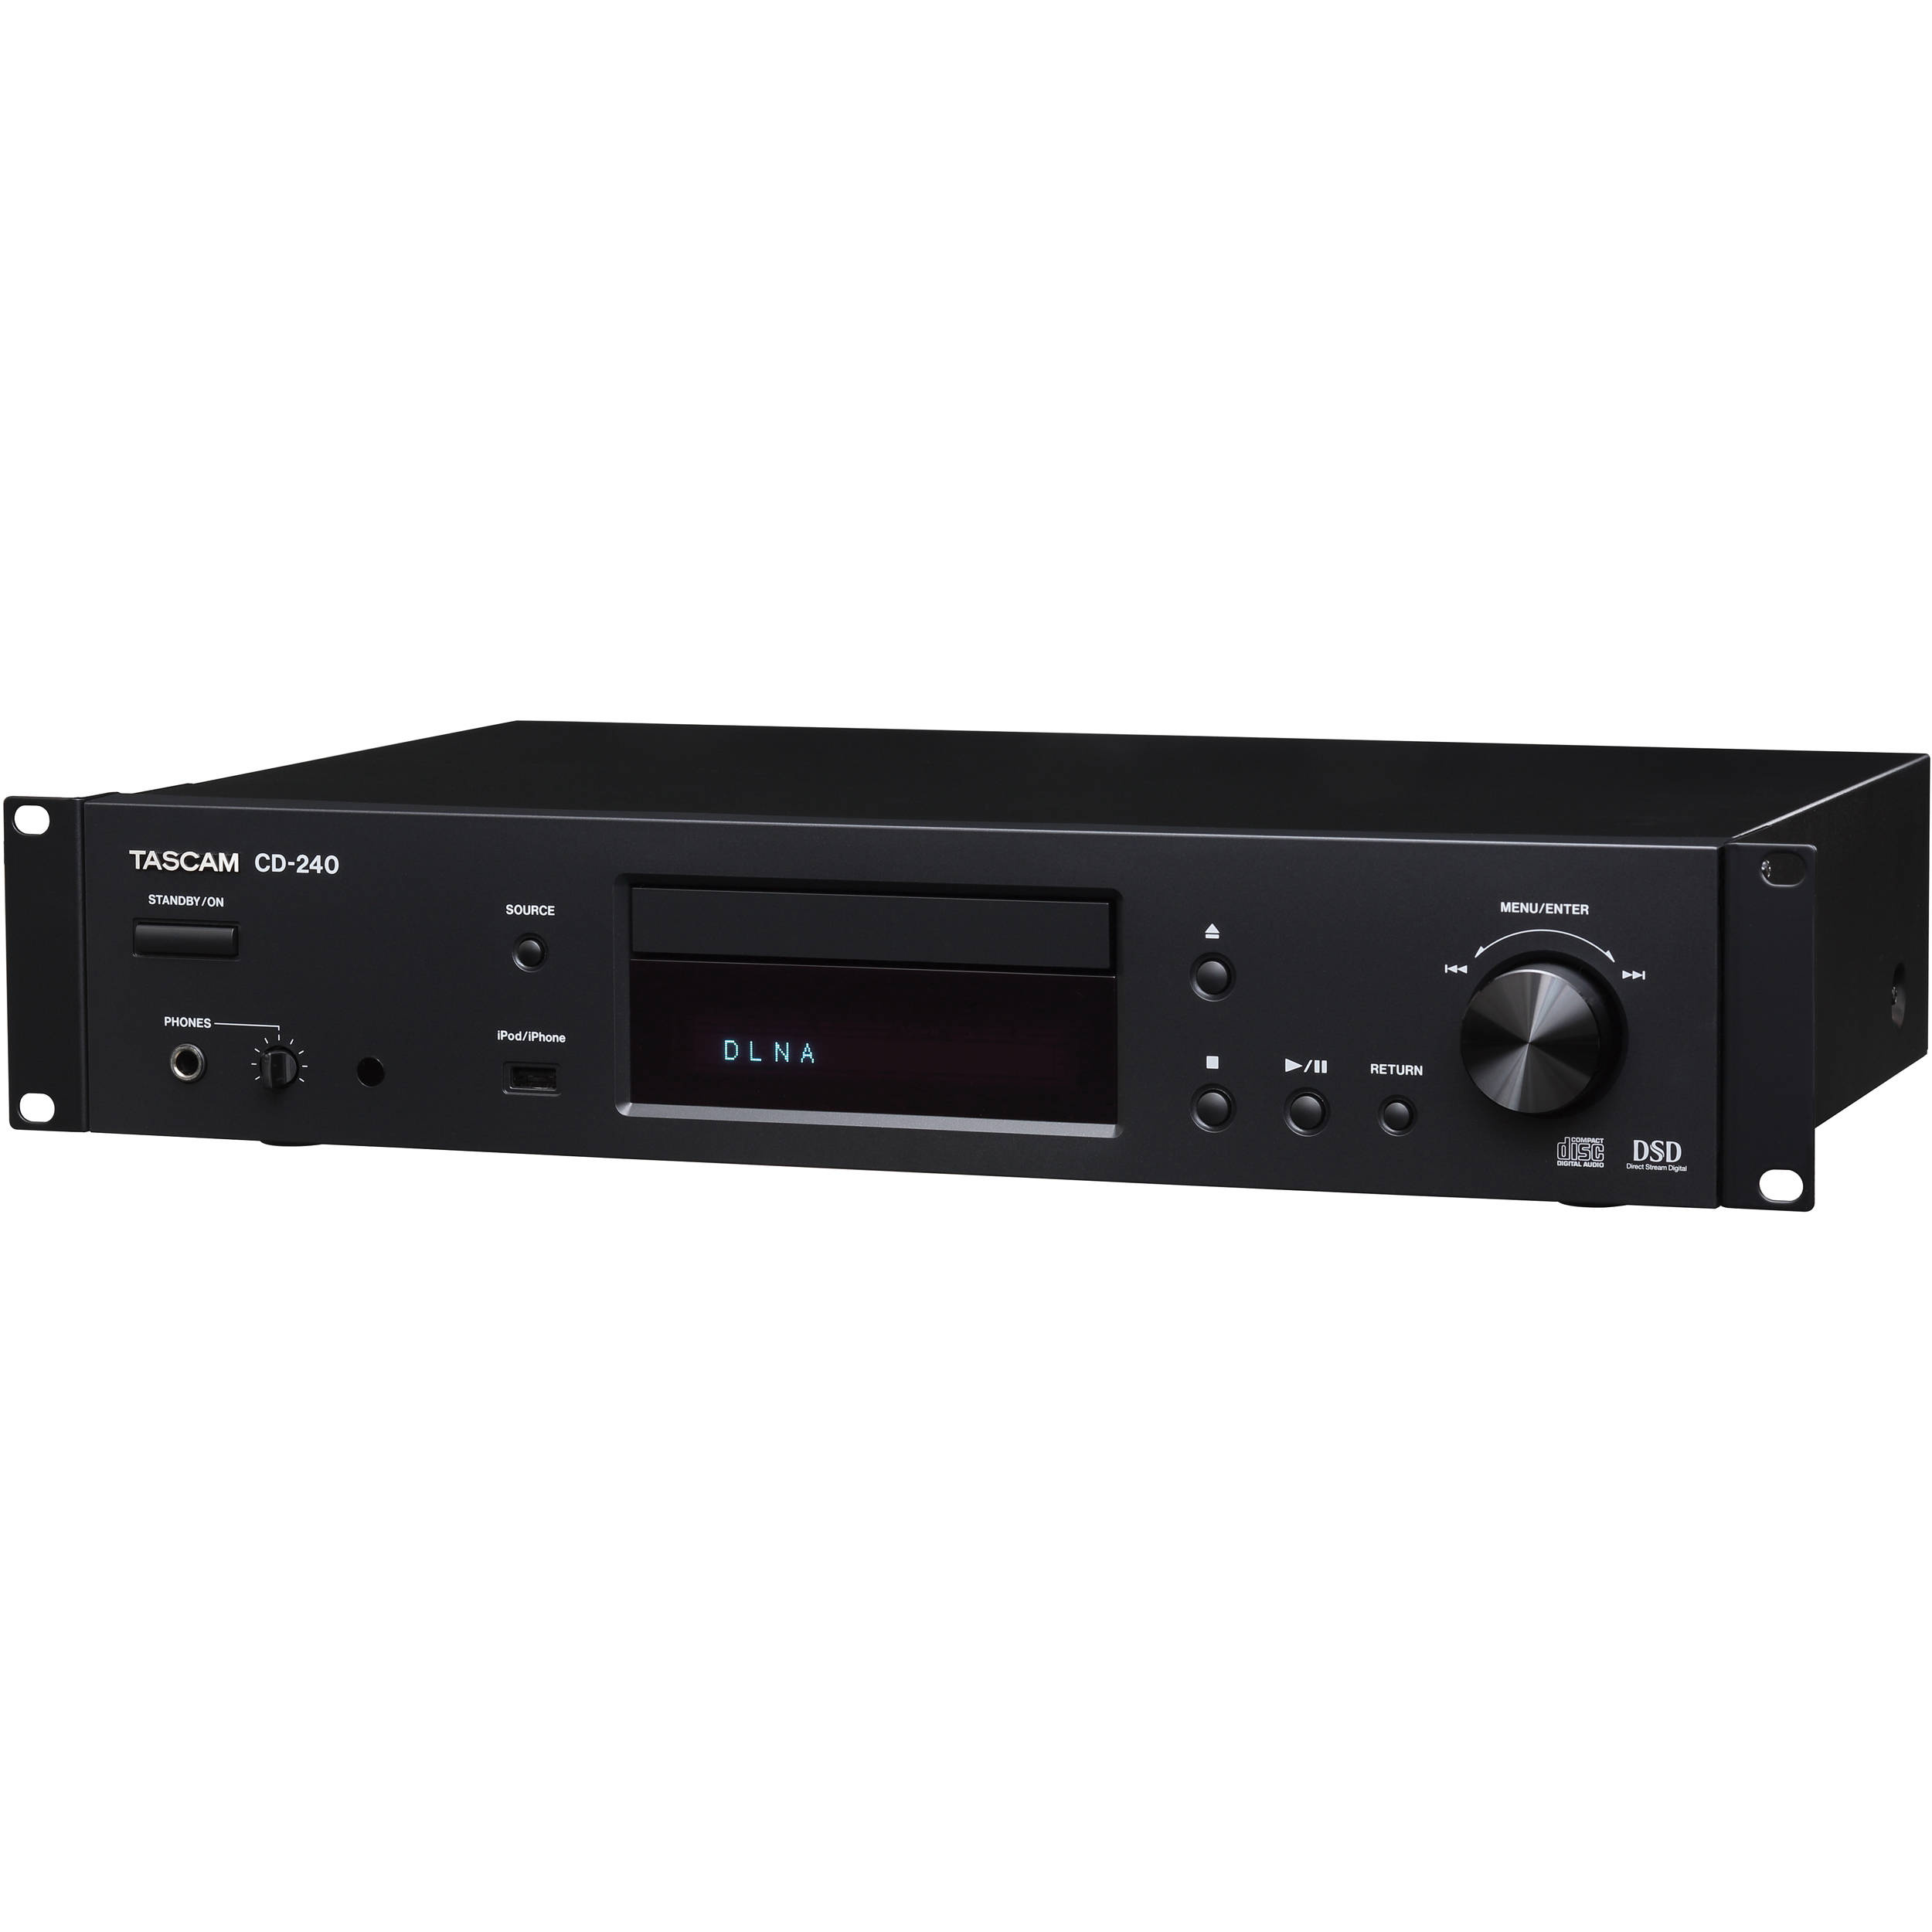 Tascam CD-240 CD and Network Audio Player